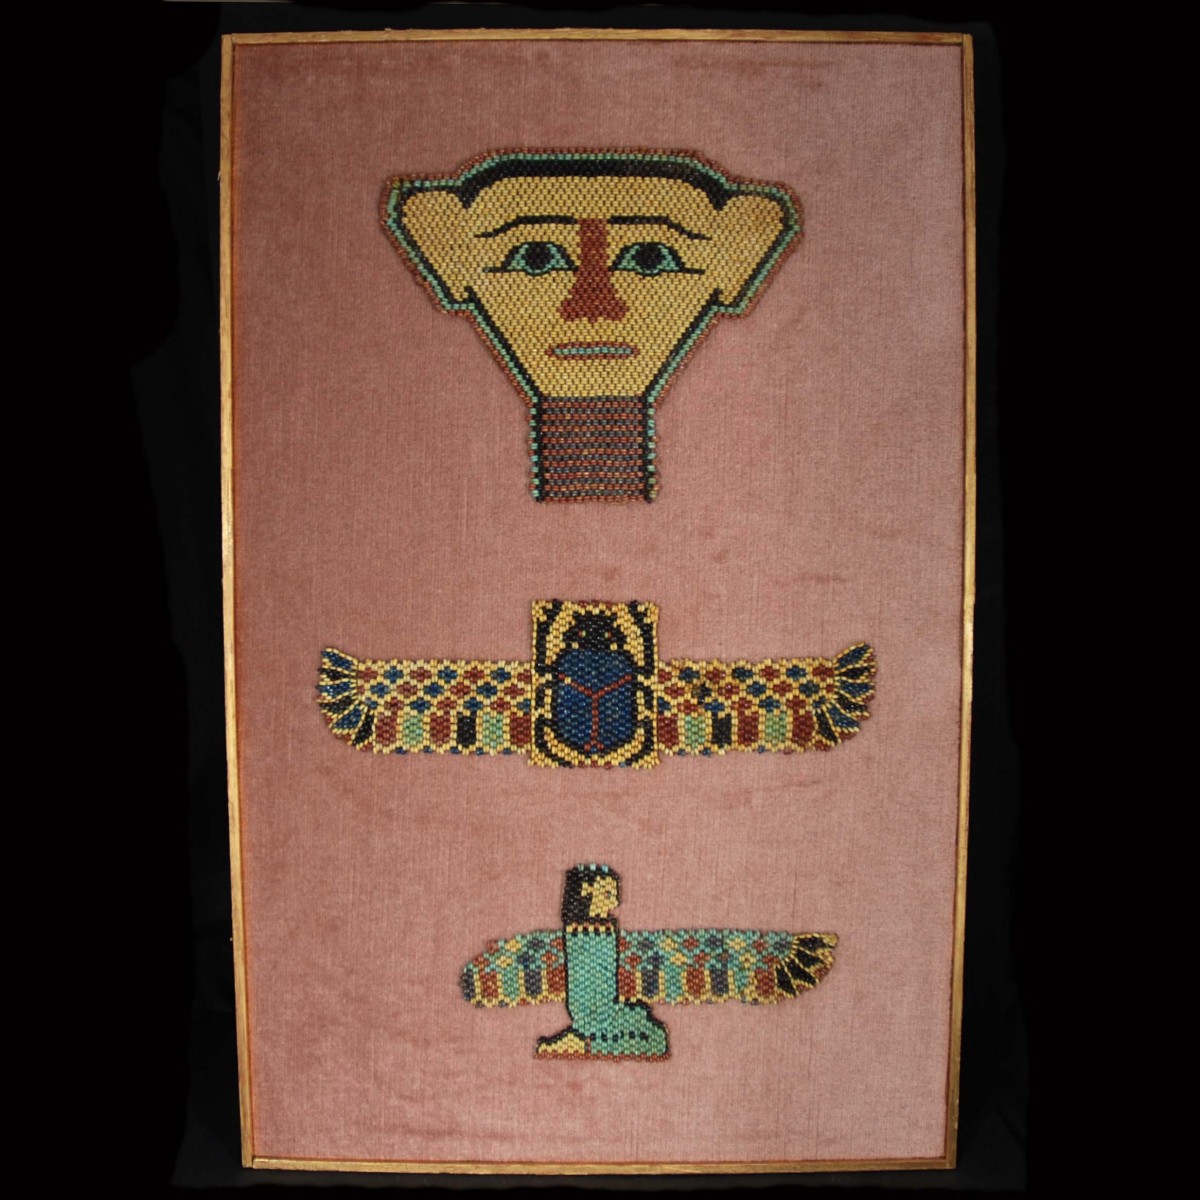 Egyptian funerary bead collection